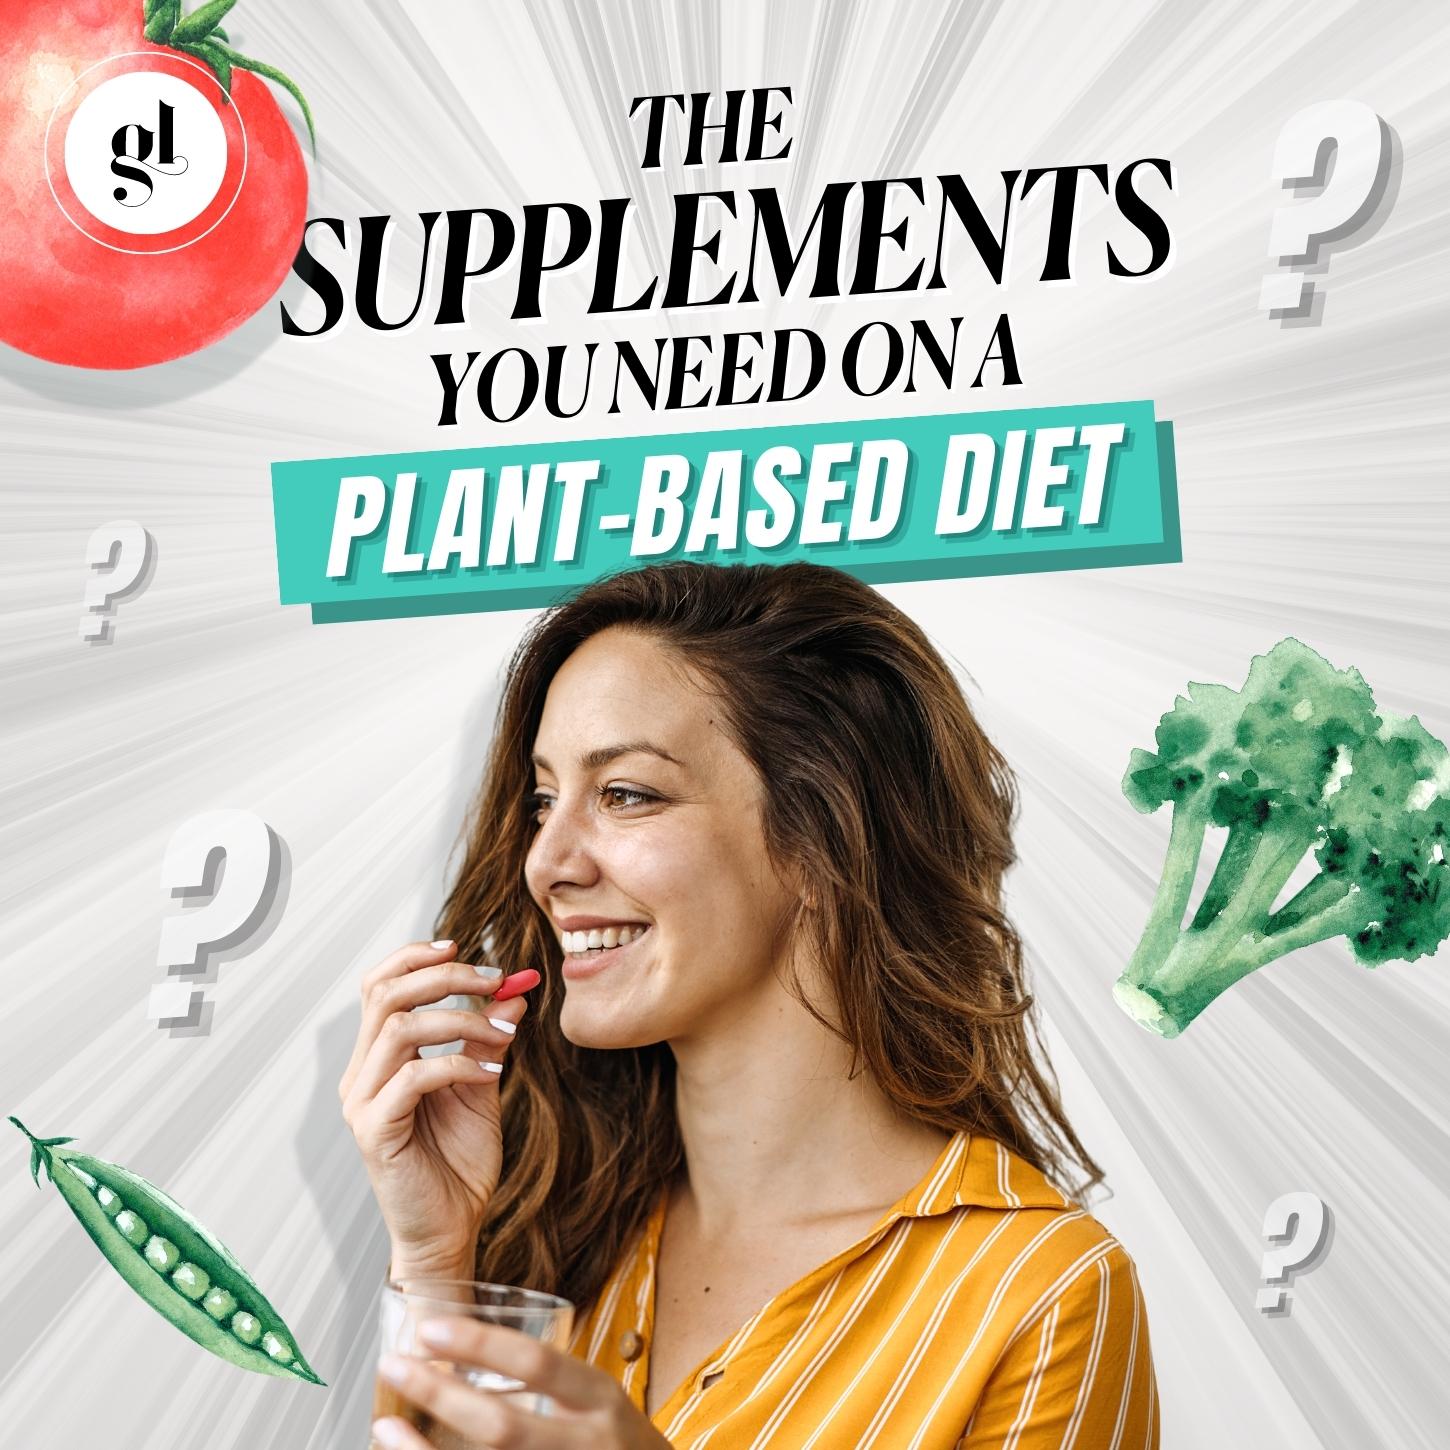 The Supplements You Need On A Plant-Based Diet